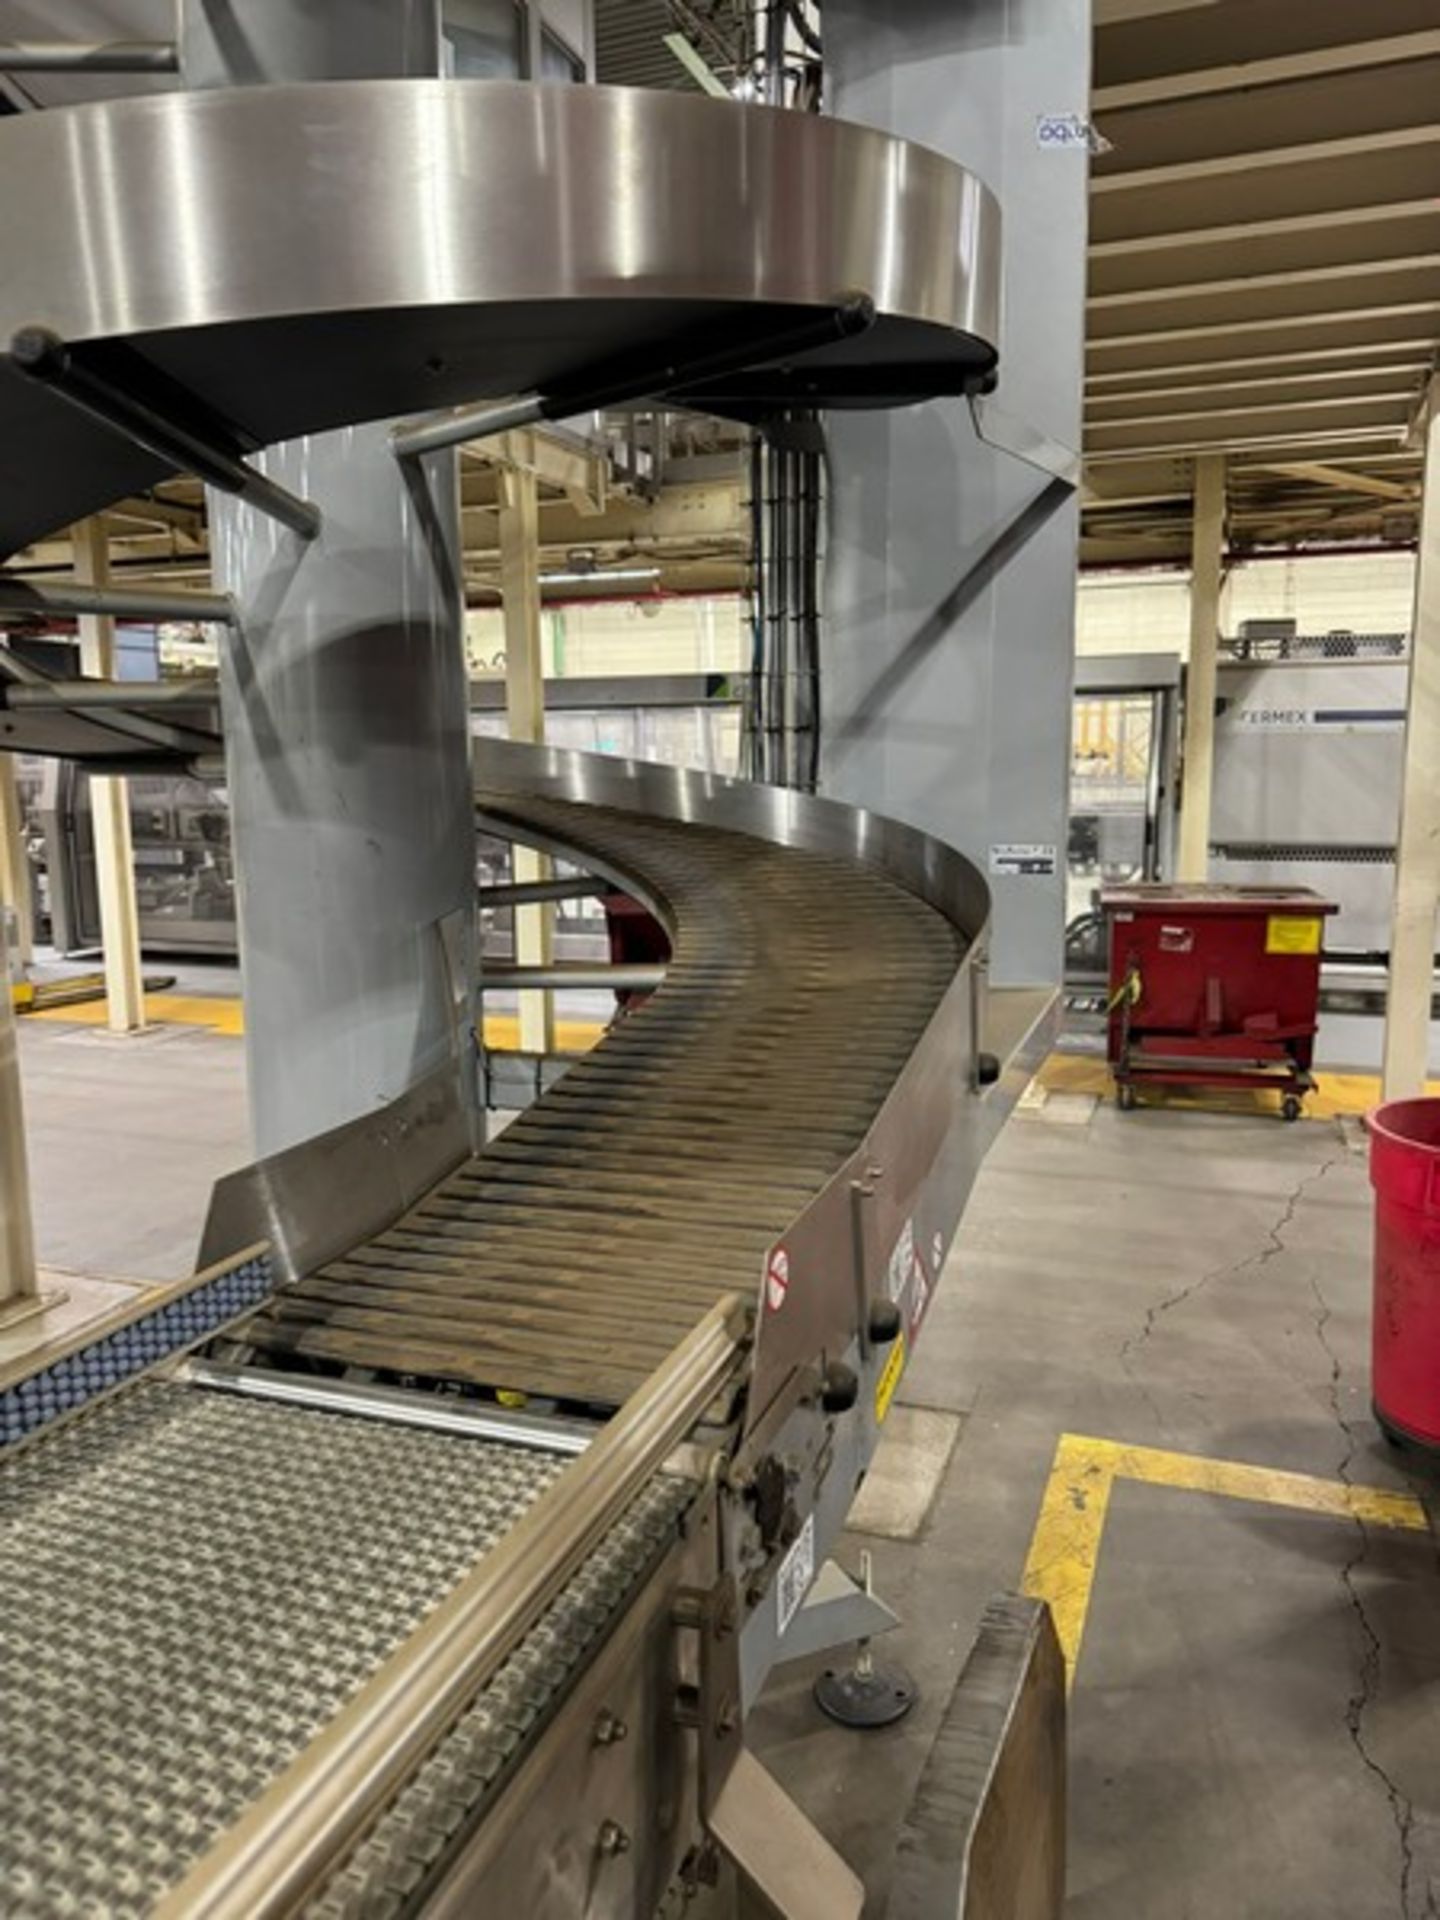 2018 AmbaFlex Spiral Conveyor, S/N 27749-01, with Aprox. 16” W Belt, with SEW Drive, Bottom to Top - Image 7 of 10